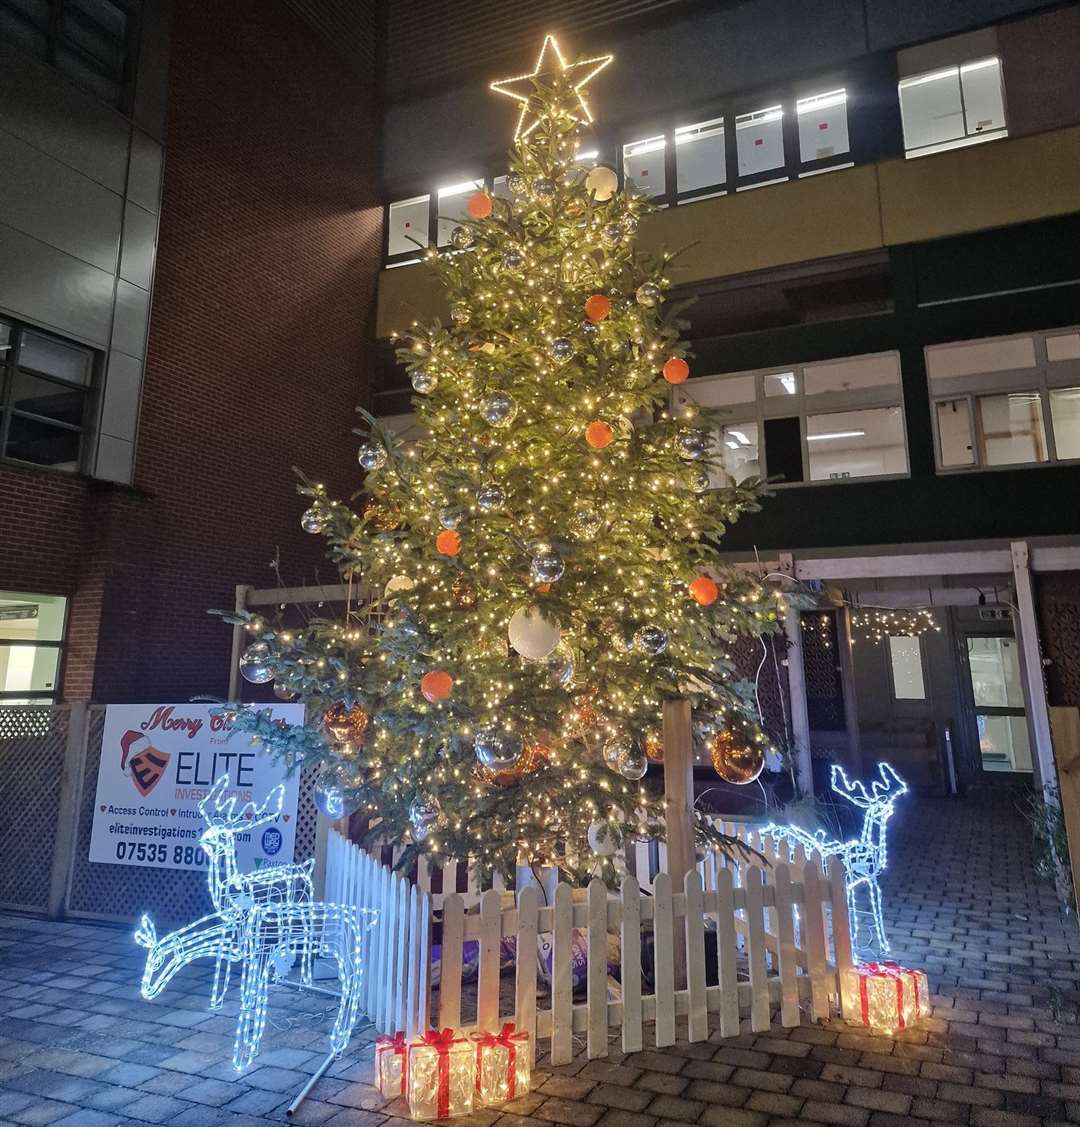 The main tree in Medway Maritime Hospital's courtyard